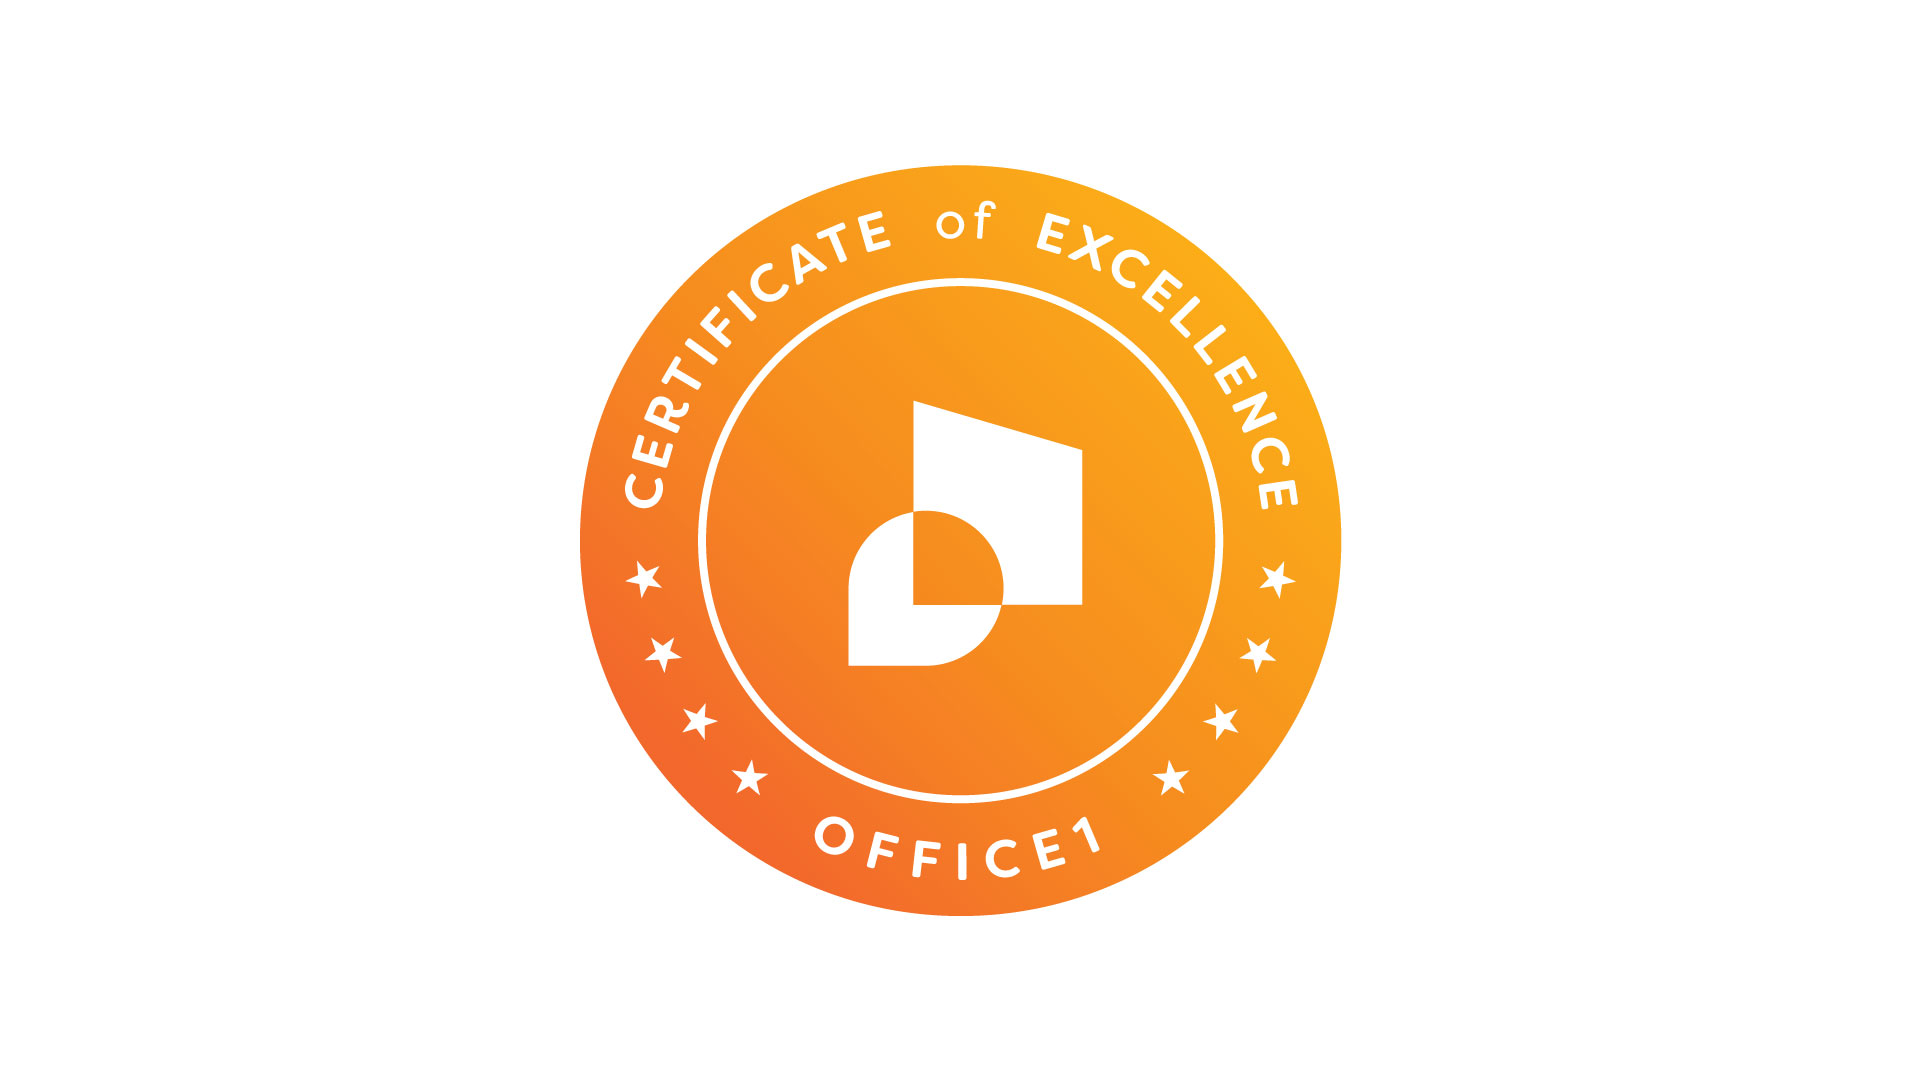 Office1 Announces Certificate of Excellence Recipients for 2018